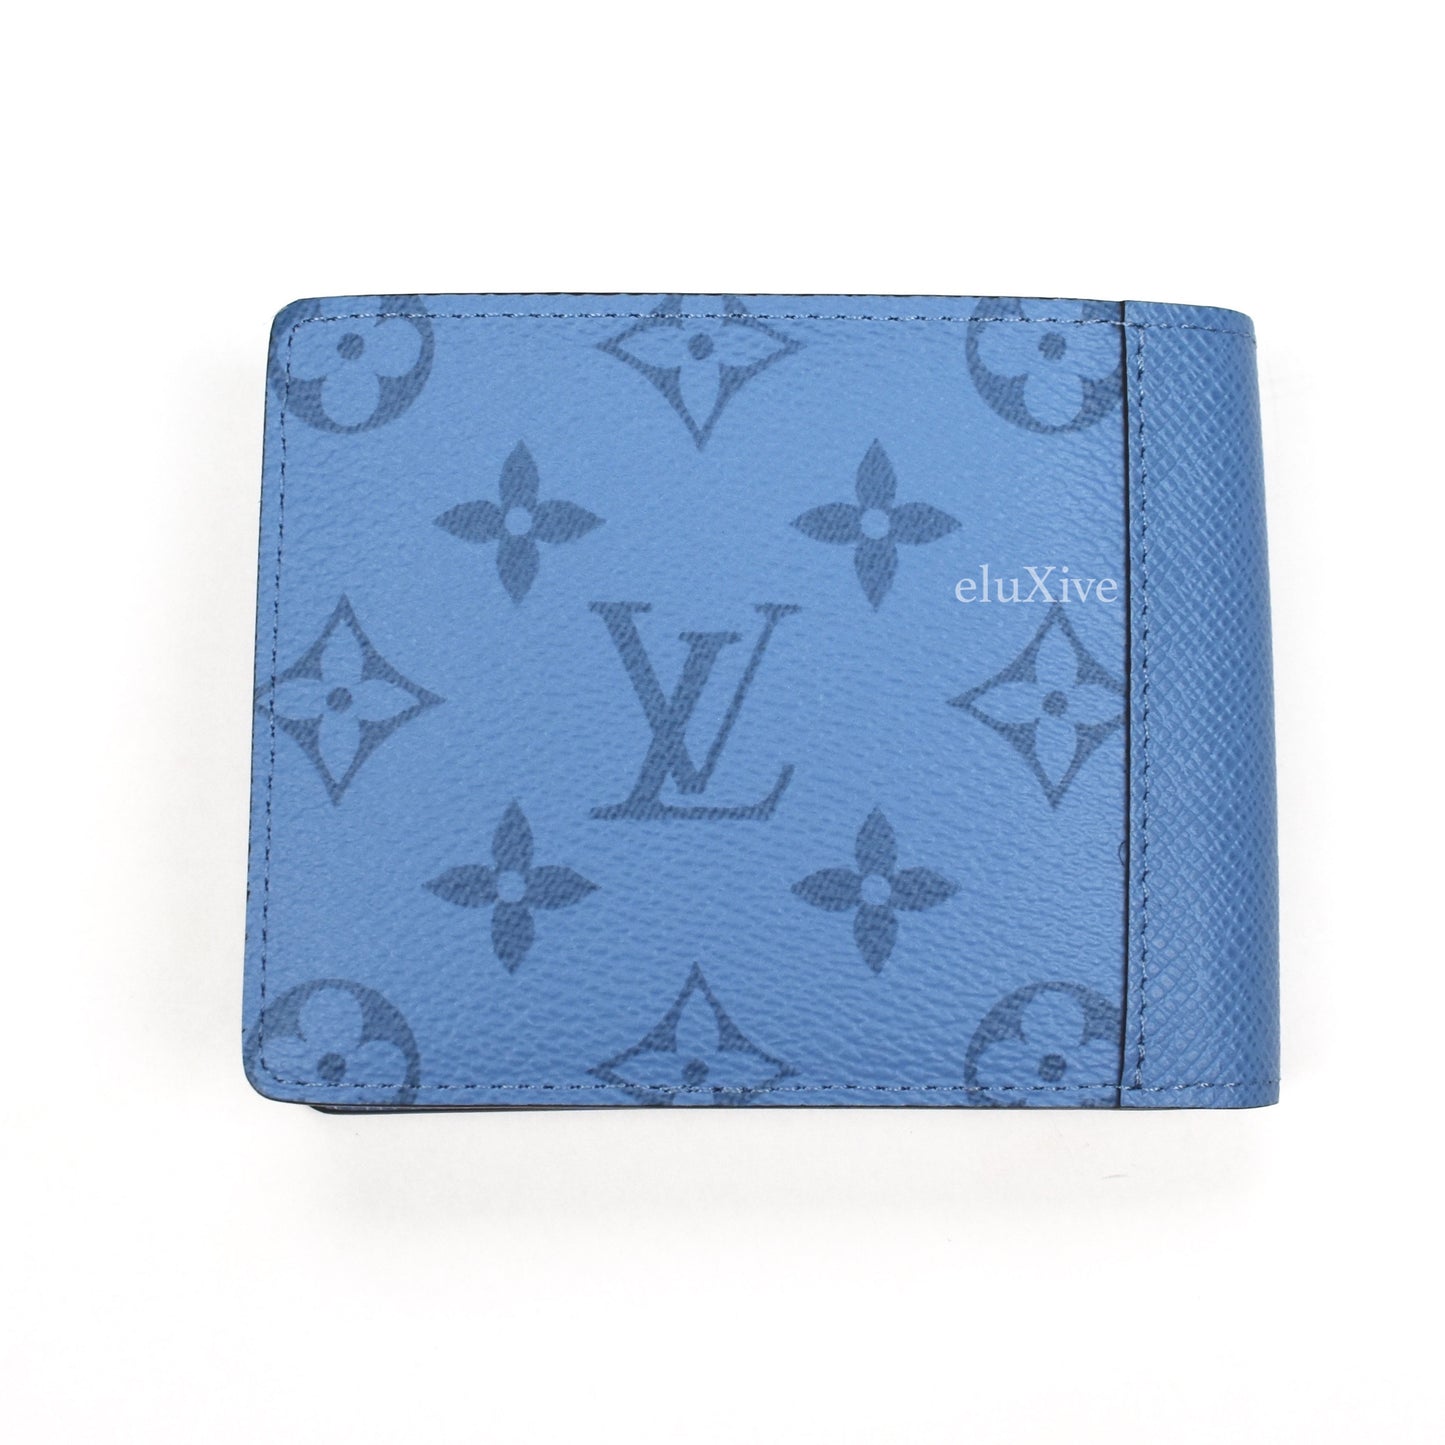 Louis Vuitton Multiple Wallet Blue in Coated Canvas - US